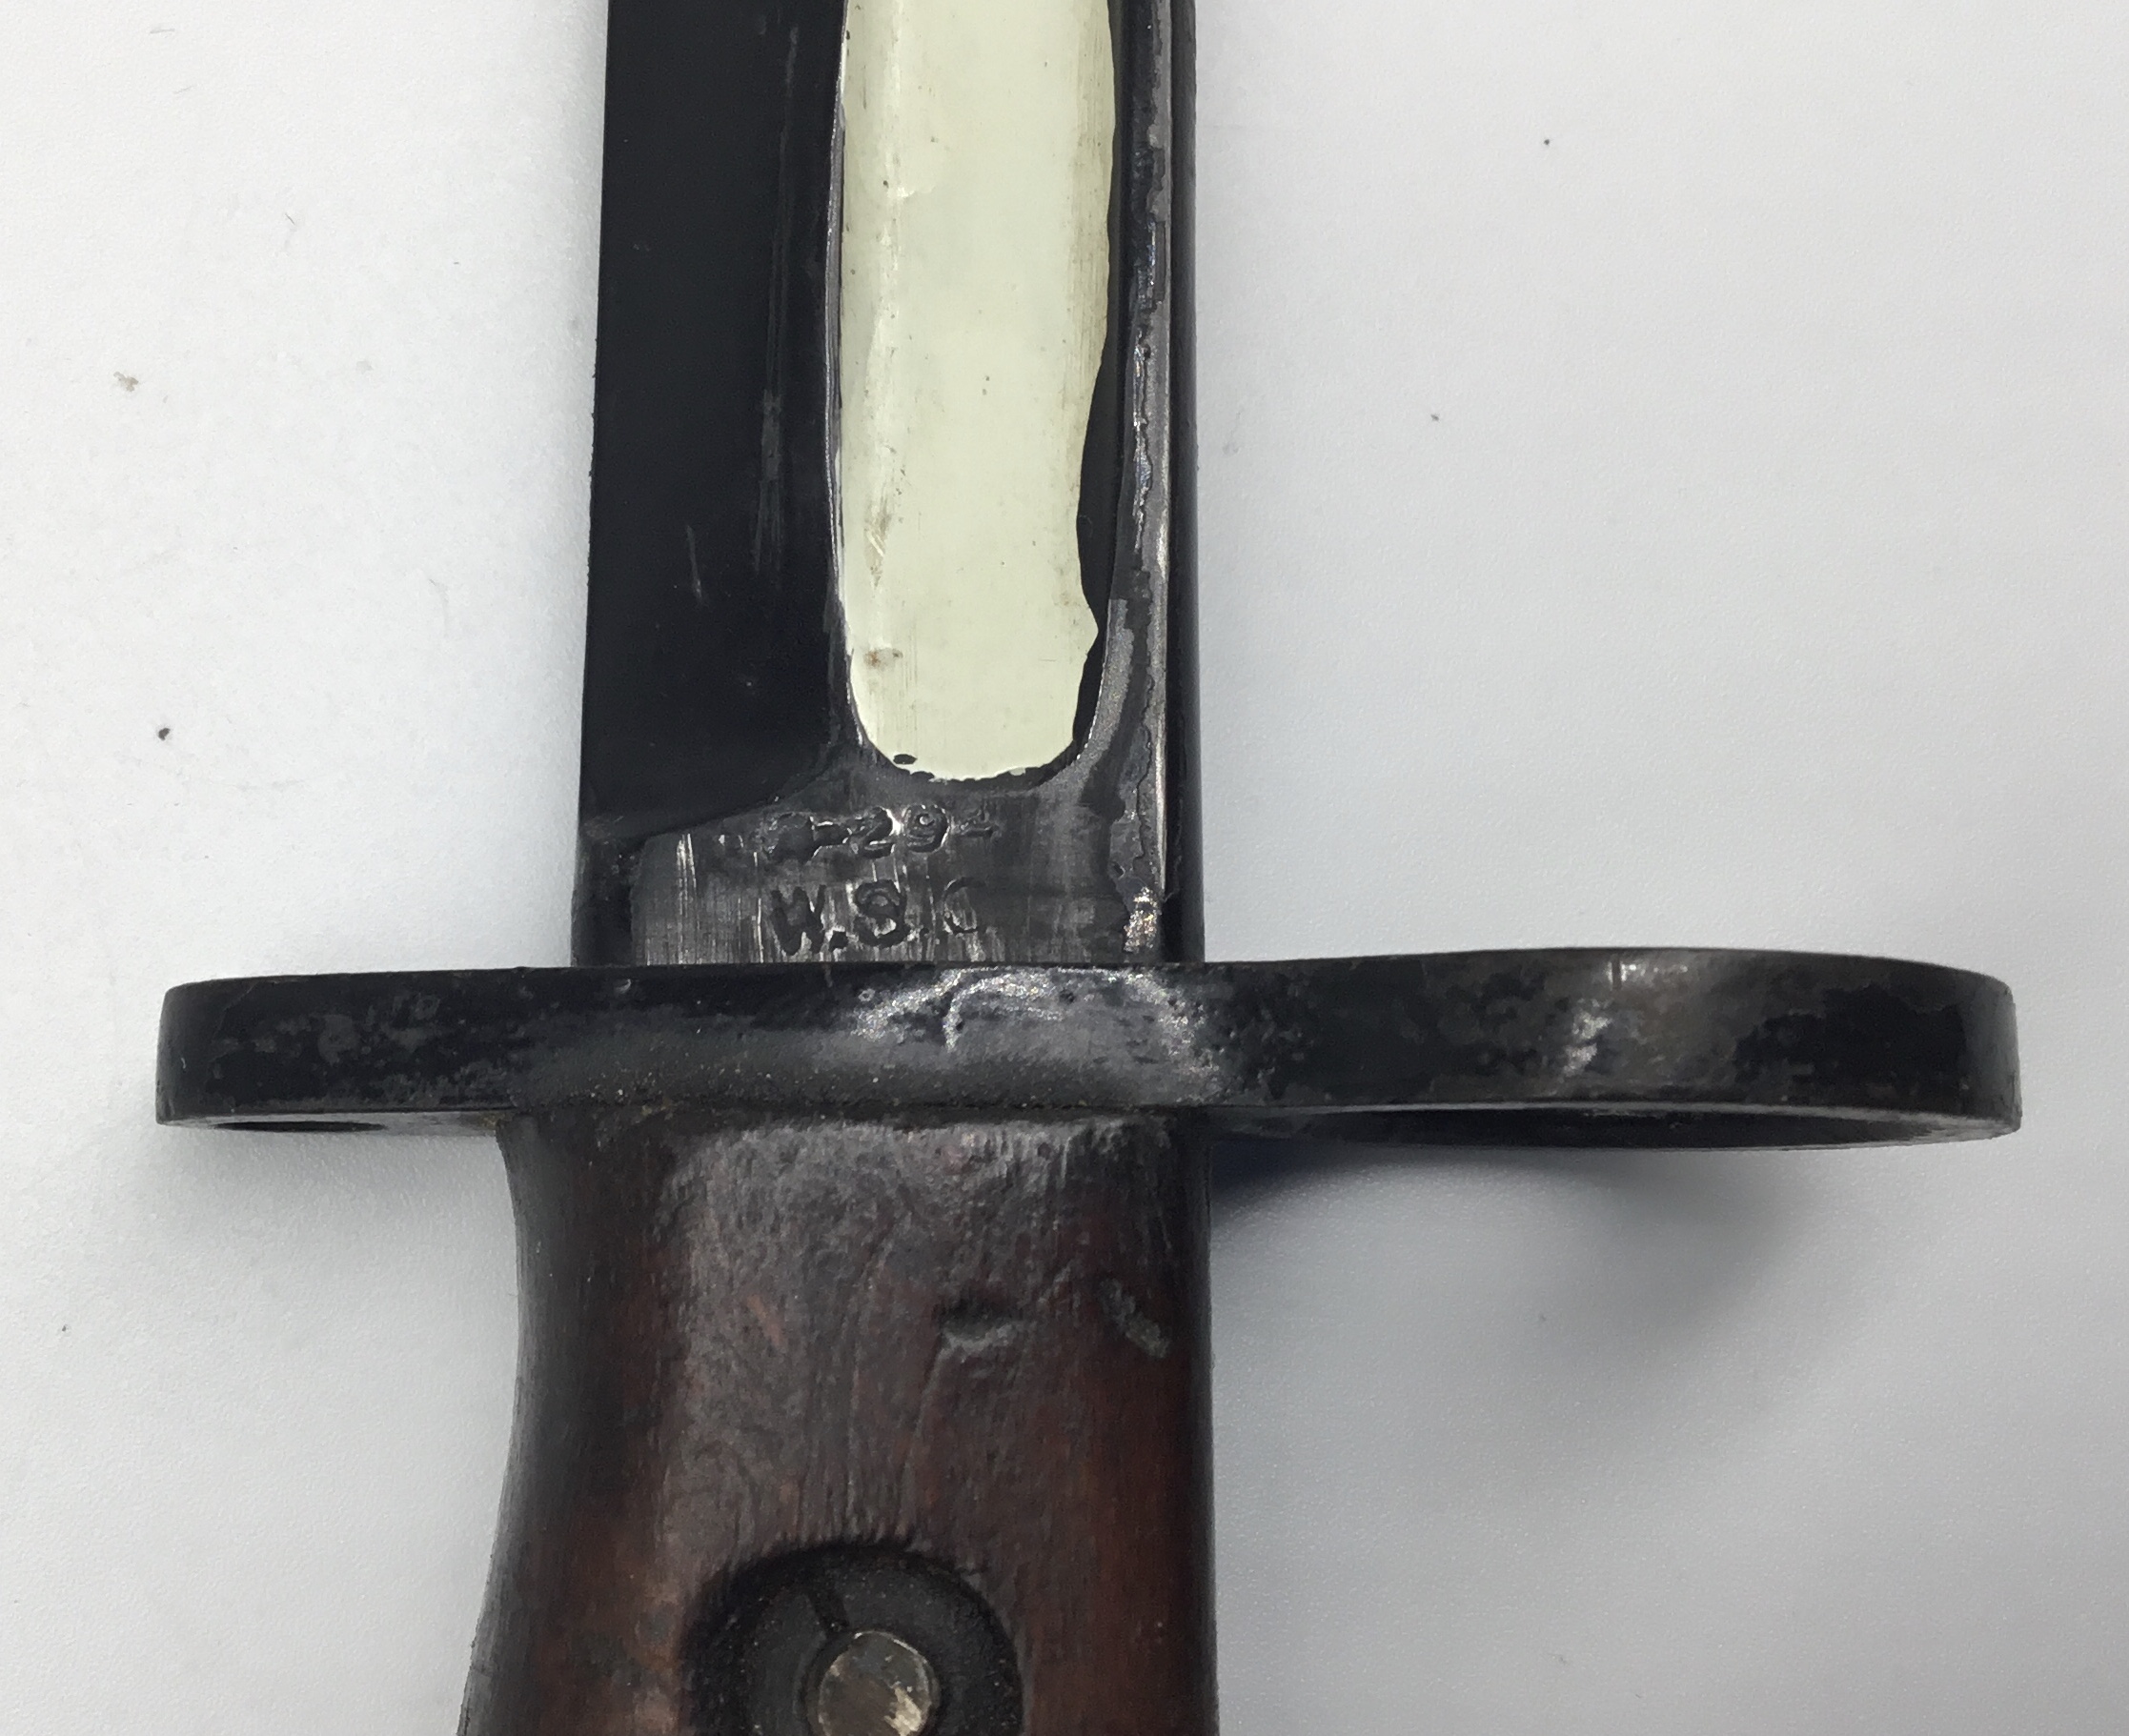 British No.5 MK1 Jungle Carbine bayonet, by the Wilkinson Sword Company. Complete with scabbard. - Image 5 of 6